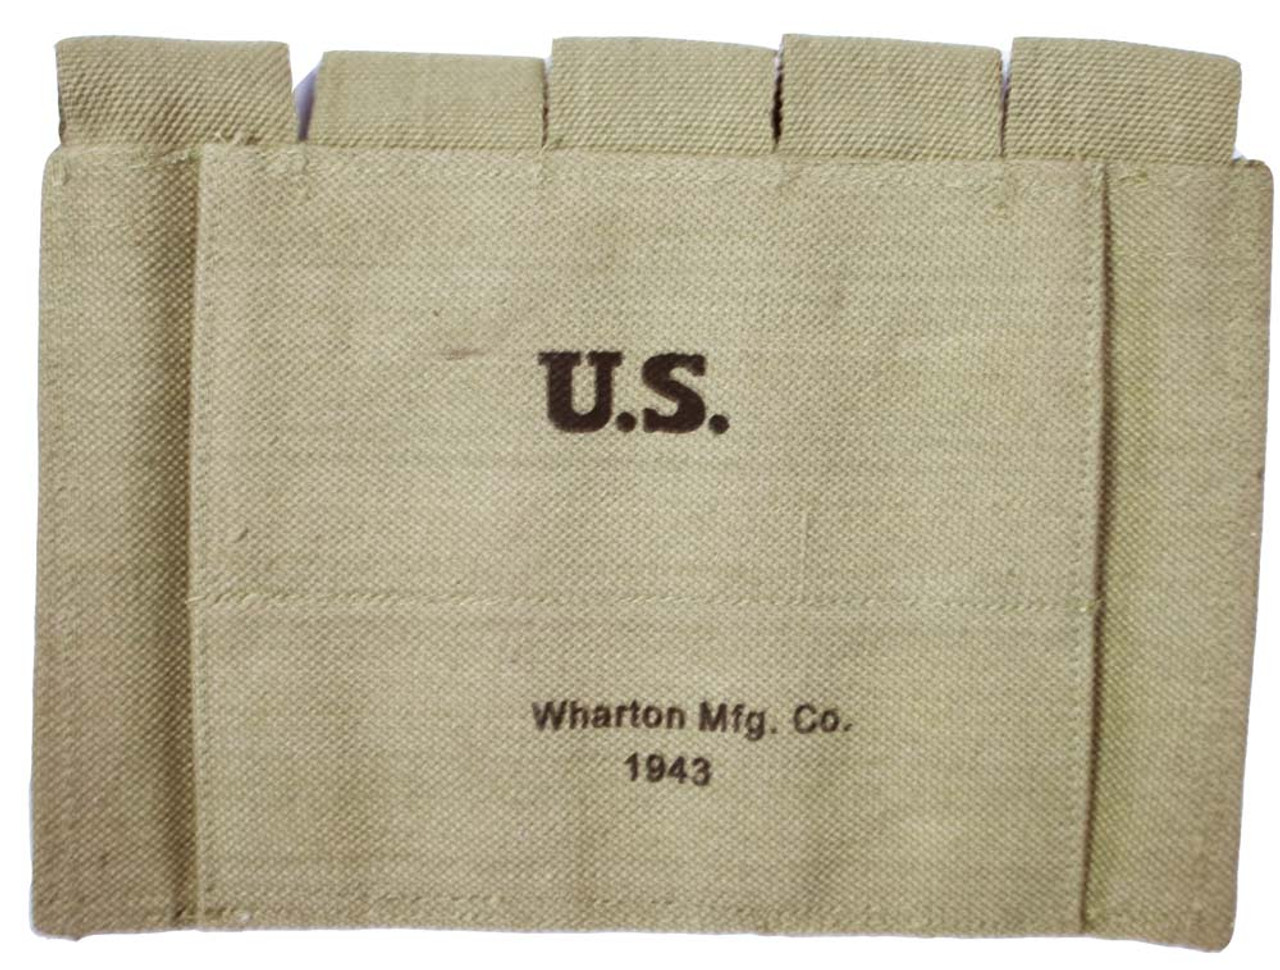 Thompson 5 Cell Magazine Pouch - Reproduction